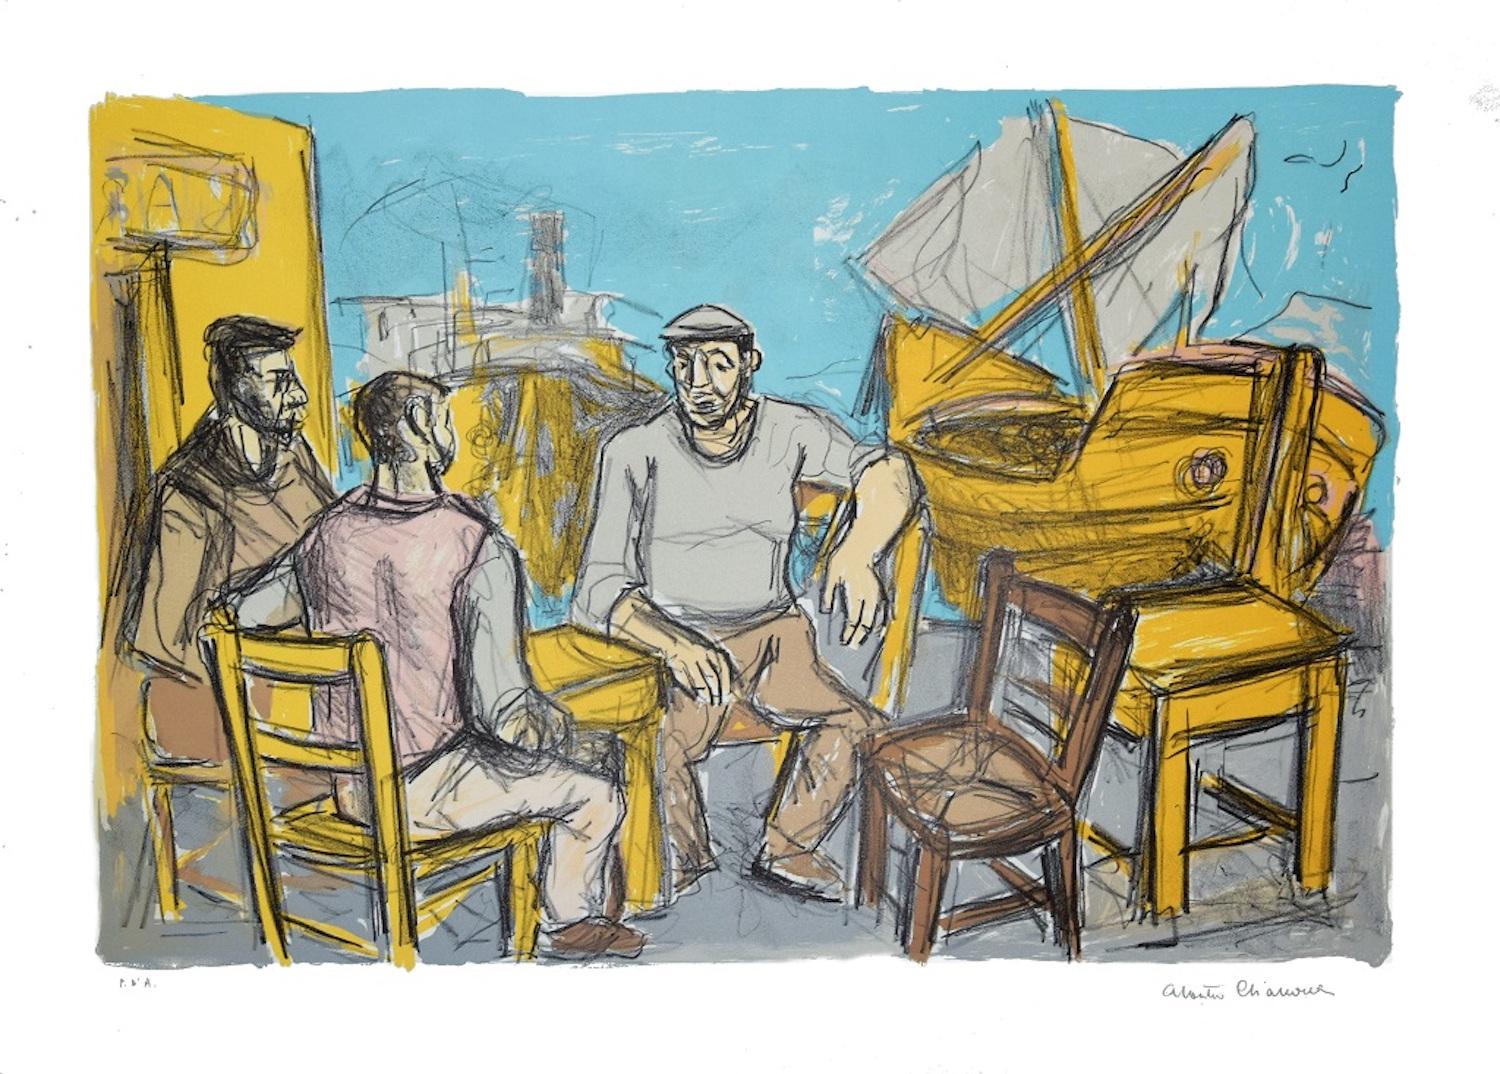 At The Harbor is an original colored lithograph realized by Alberto Chiancone during the 1970s.

The artwork is hand-signed in pencil by the artist on the lower right. Artist's proof (P.A. write in pencil on lower left). Original title: Al